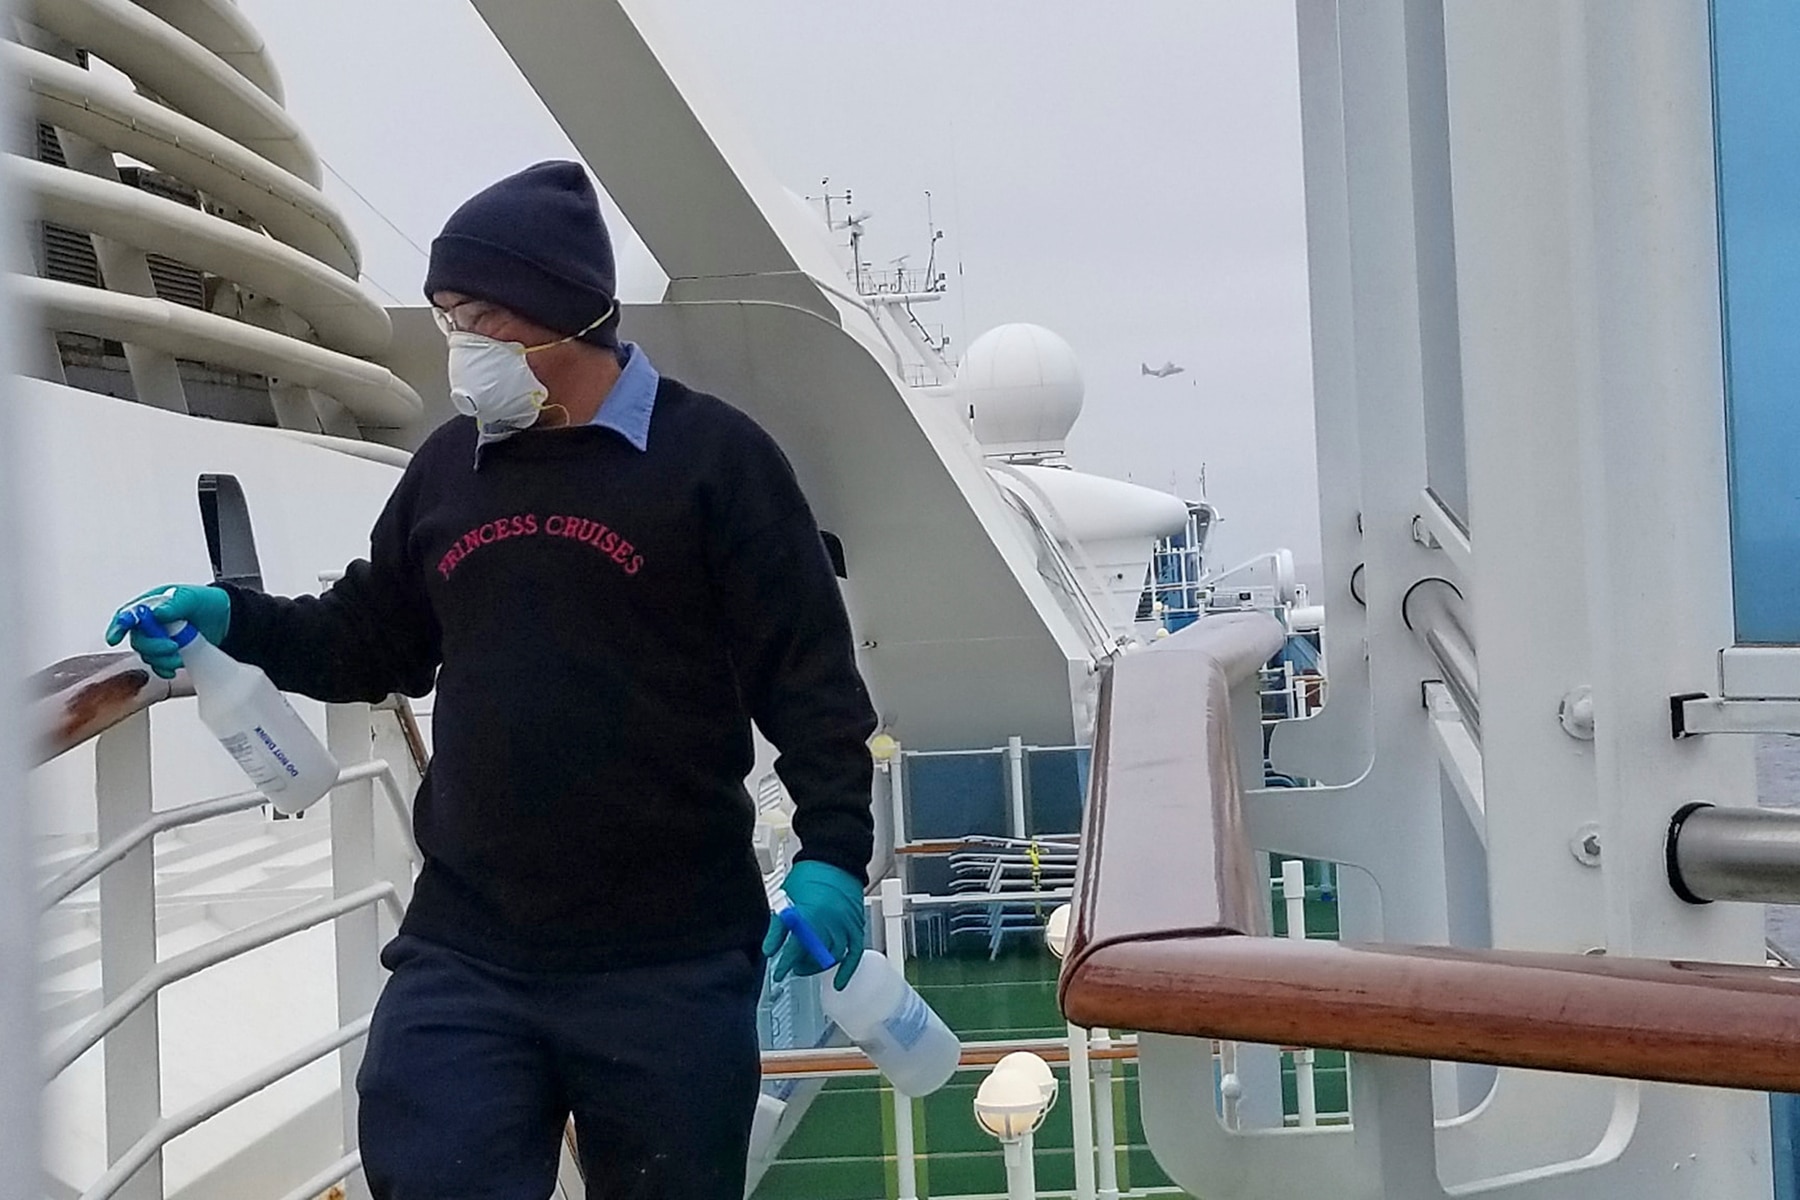 A cruise ship worker cleans a railing on the Grand Princess off the California coast